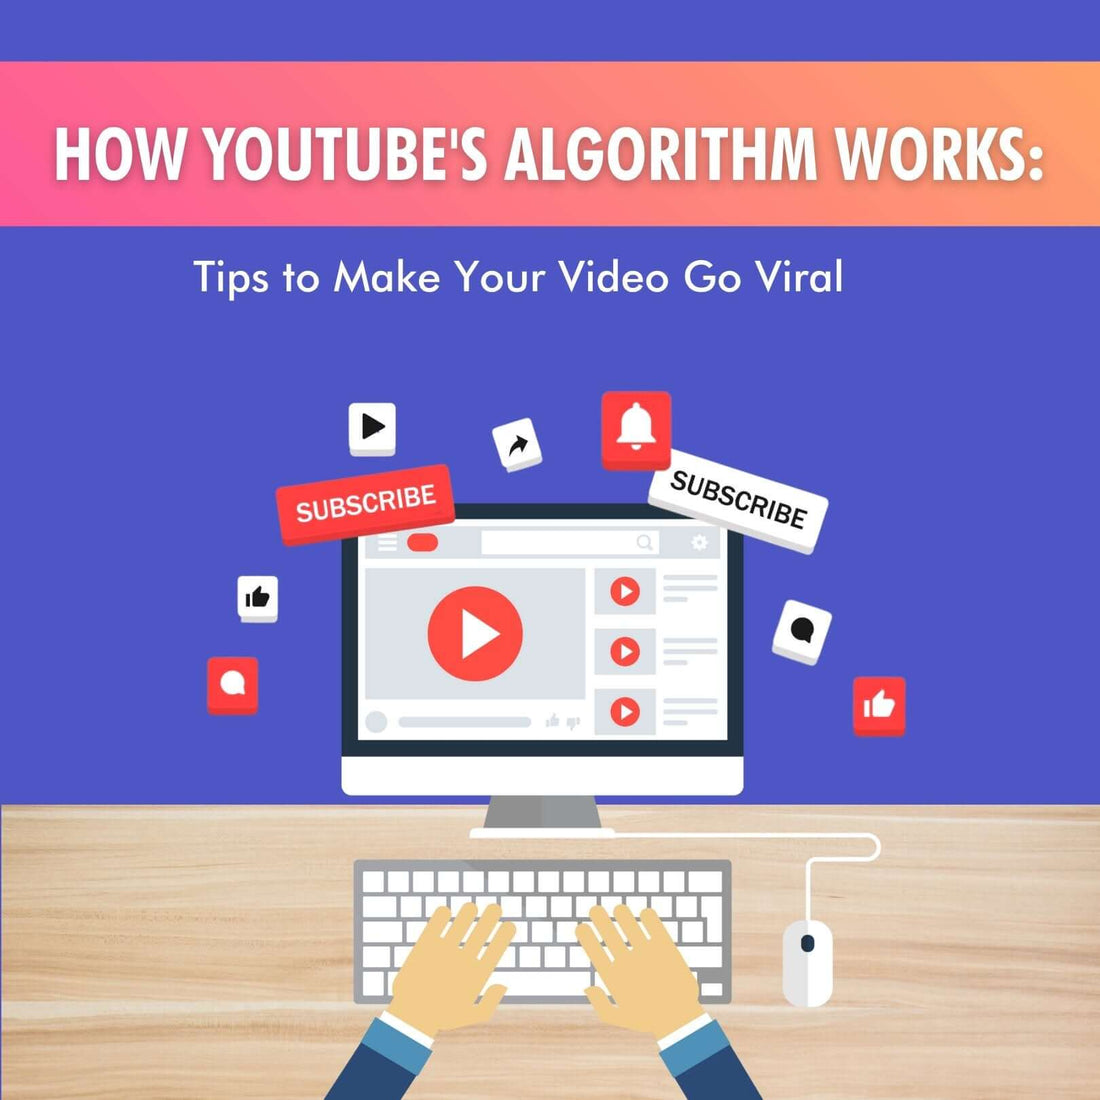 How Youtube's Algorithm Works: Tips to Make Your Video Go Viral